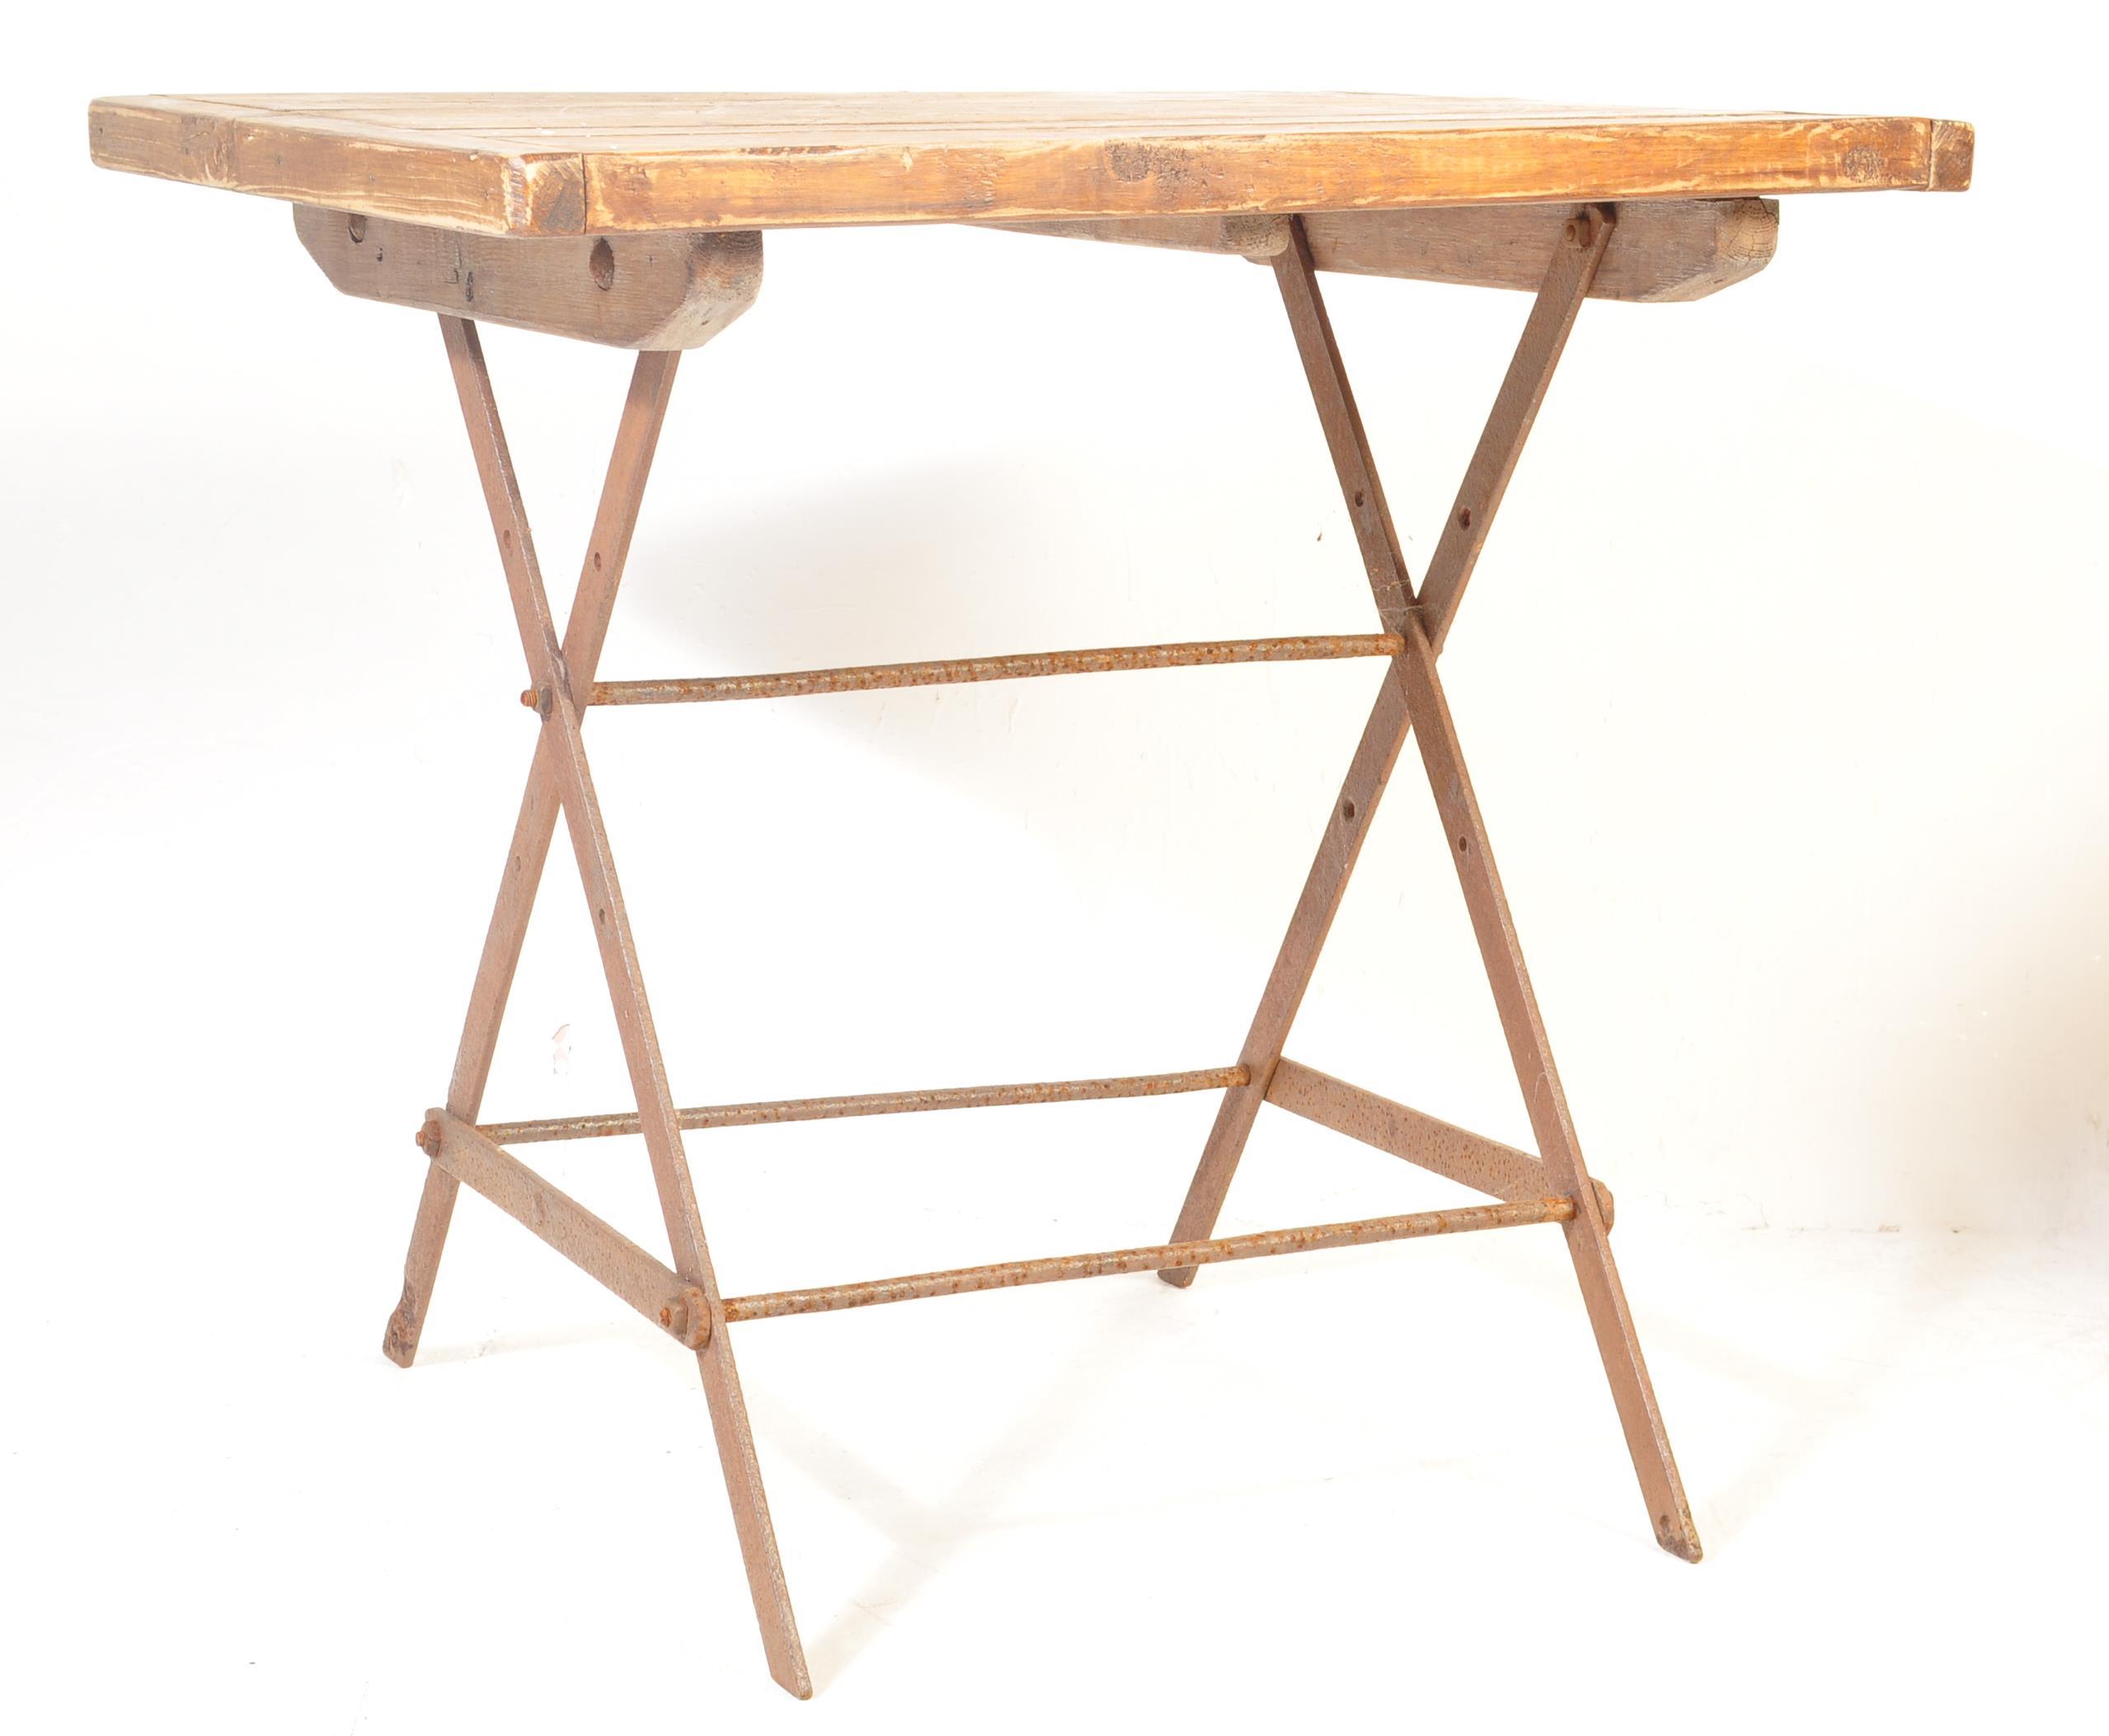 MID 20TH CENTURY OAK AND IRON FACTORY INDUSTRIAL TABLE